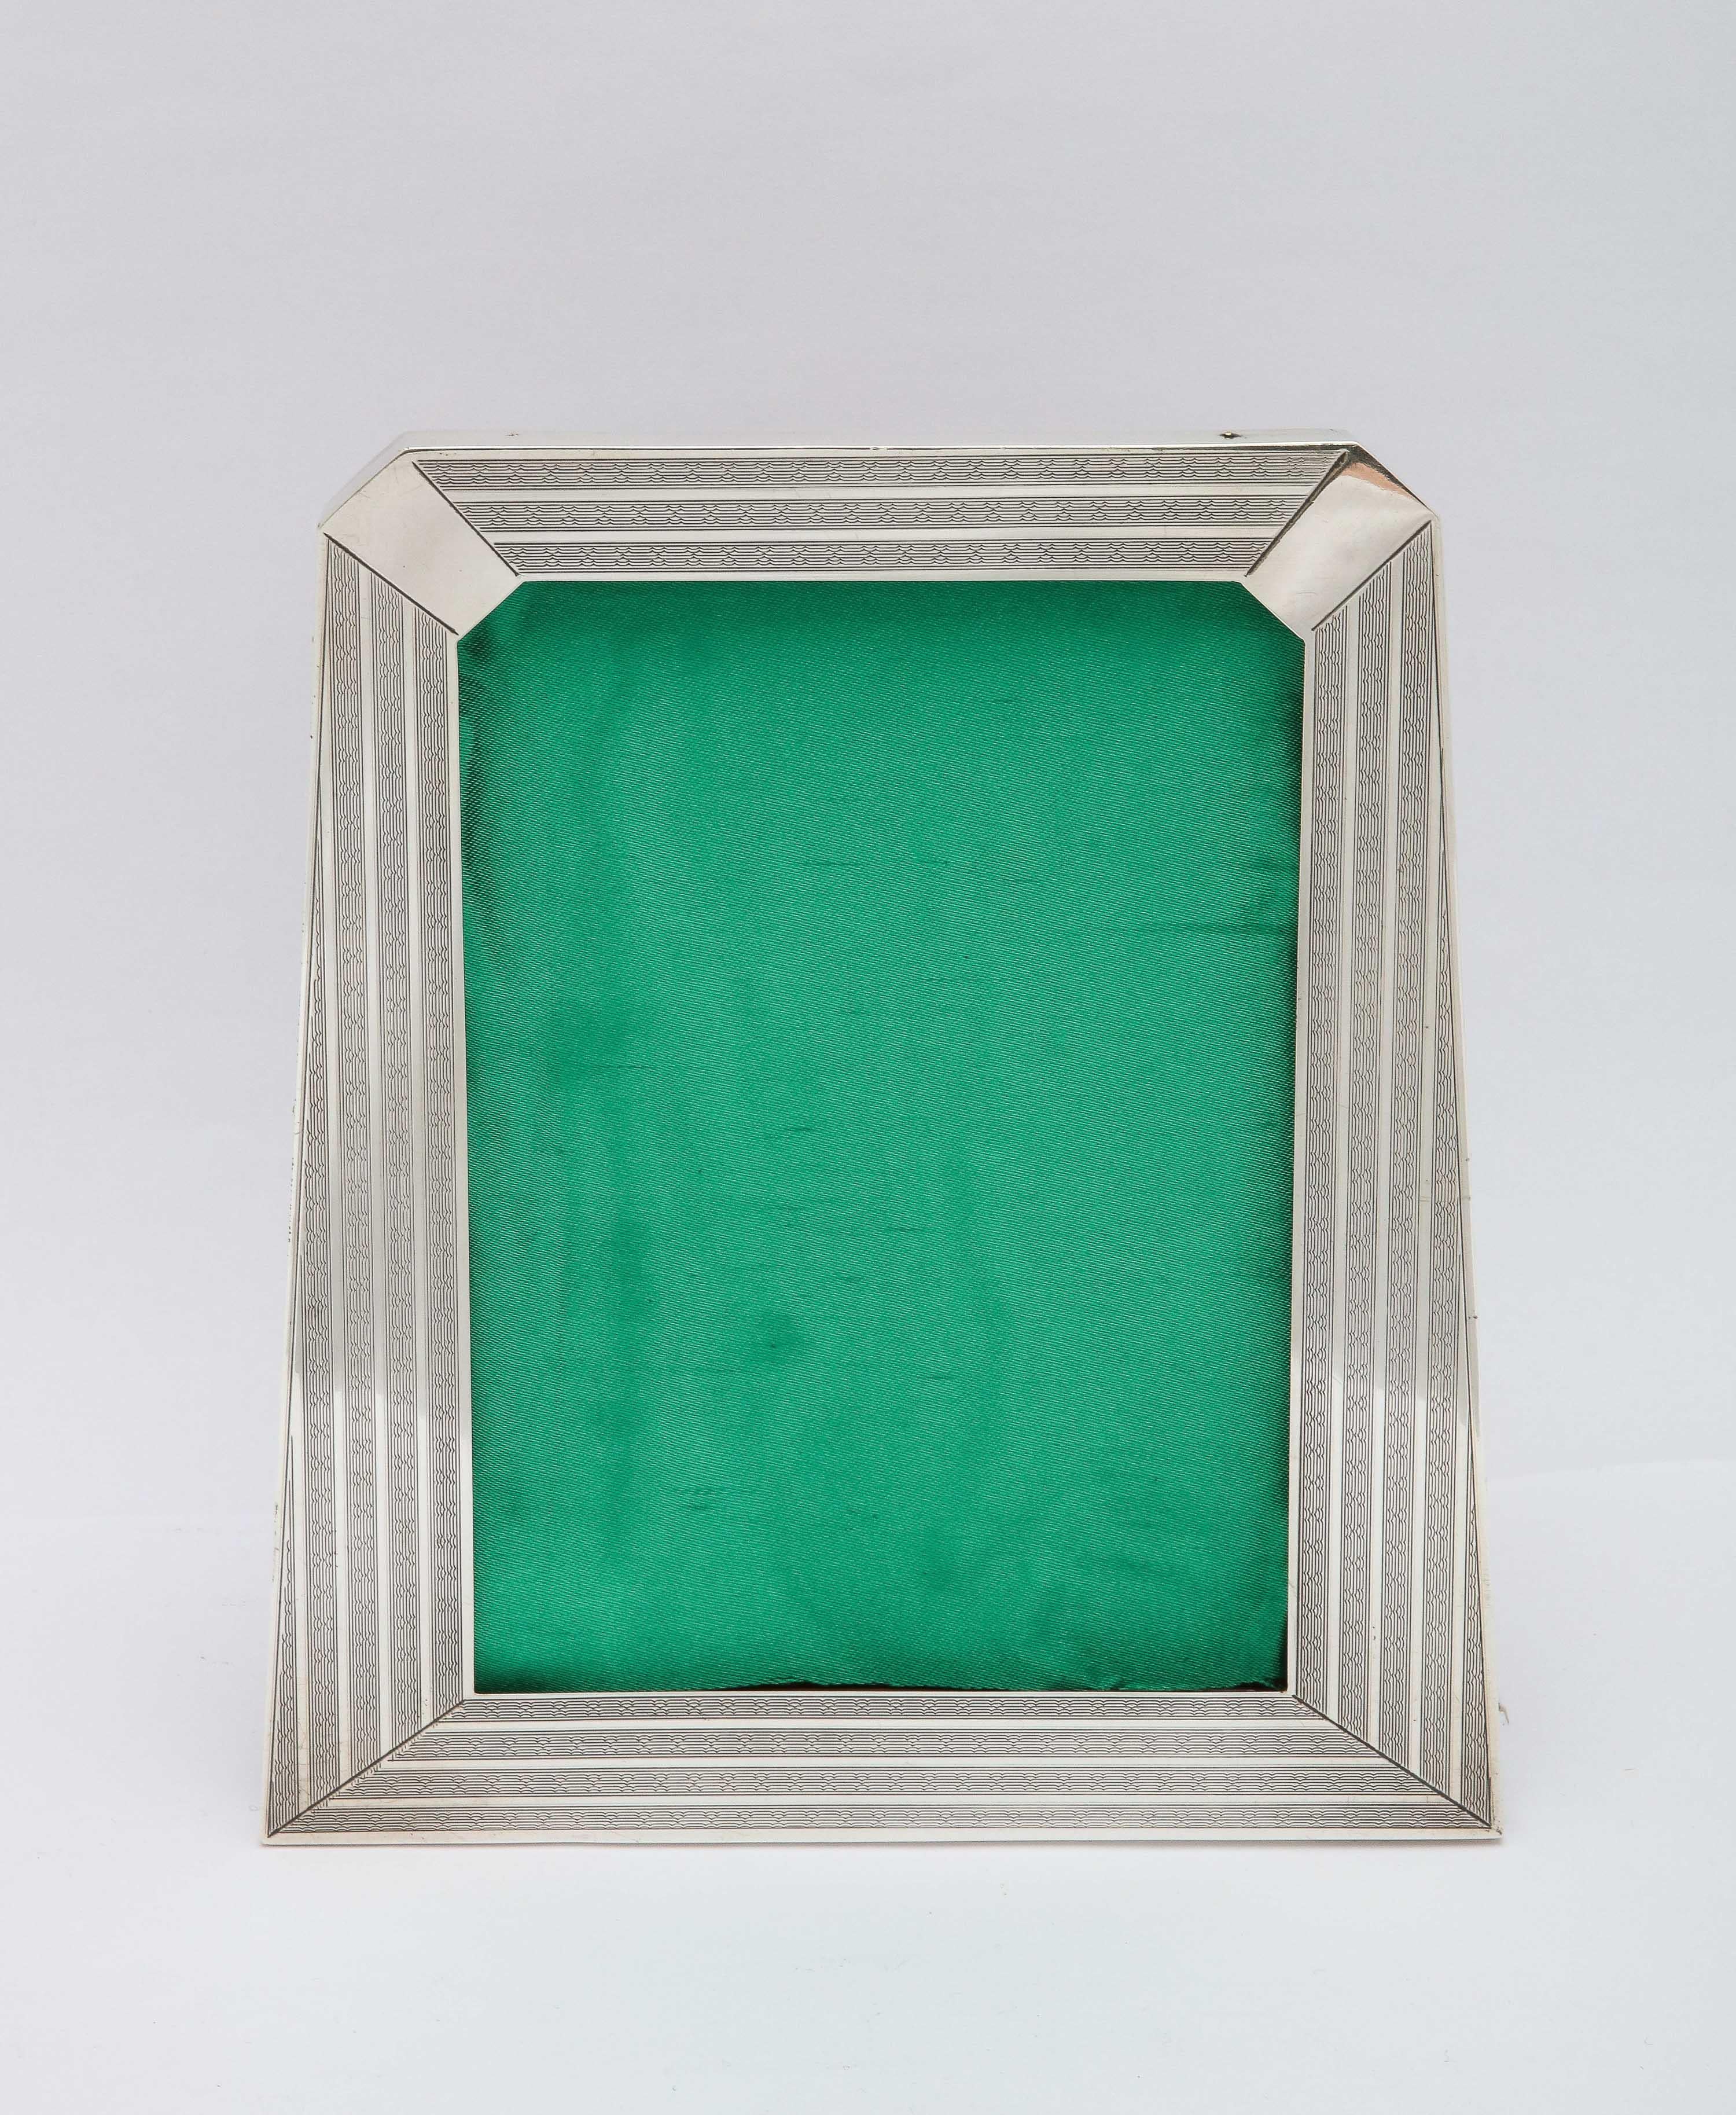 Rare, unusual, Art Deco sterling silver hexagonal picture frame with wood back, Birmingham, England, year-hallmarked for 1928, P.J. Finch - maker. Frame is engine-turned and tuxedo-striped in design, having two non-engine-turned areas in each top